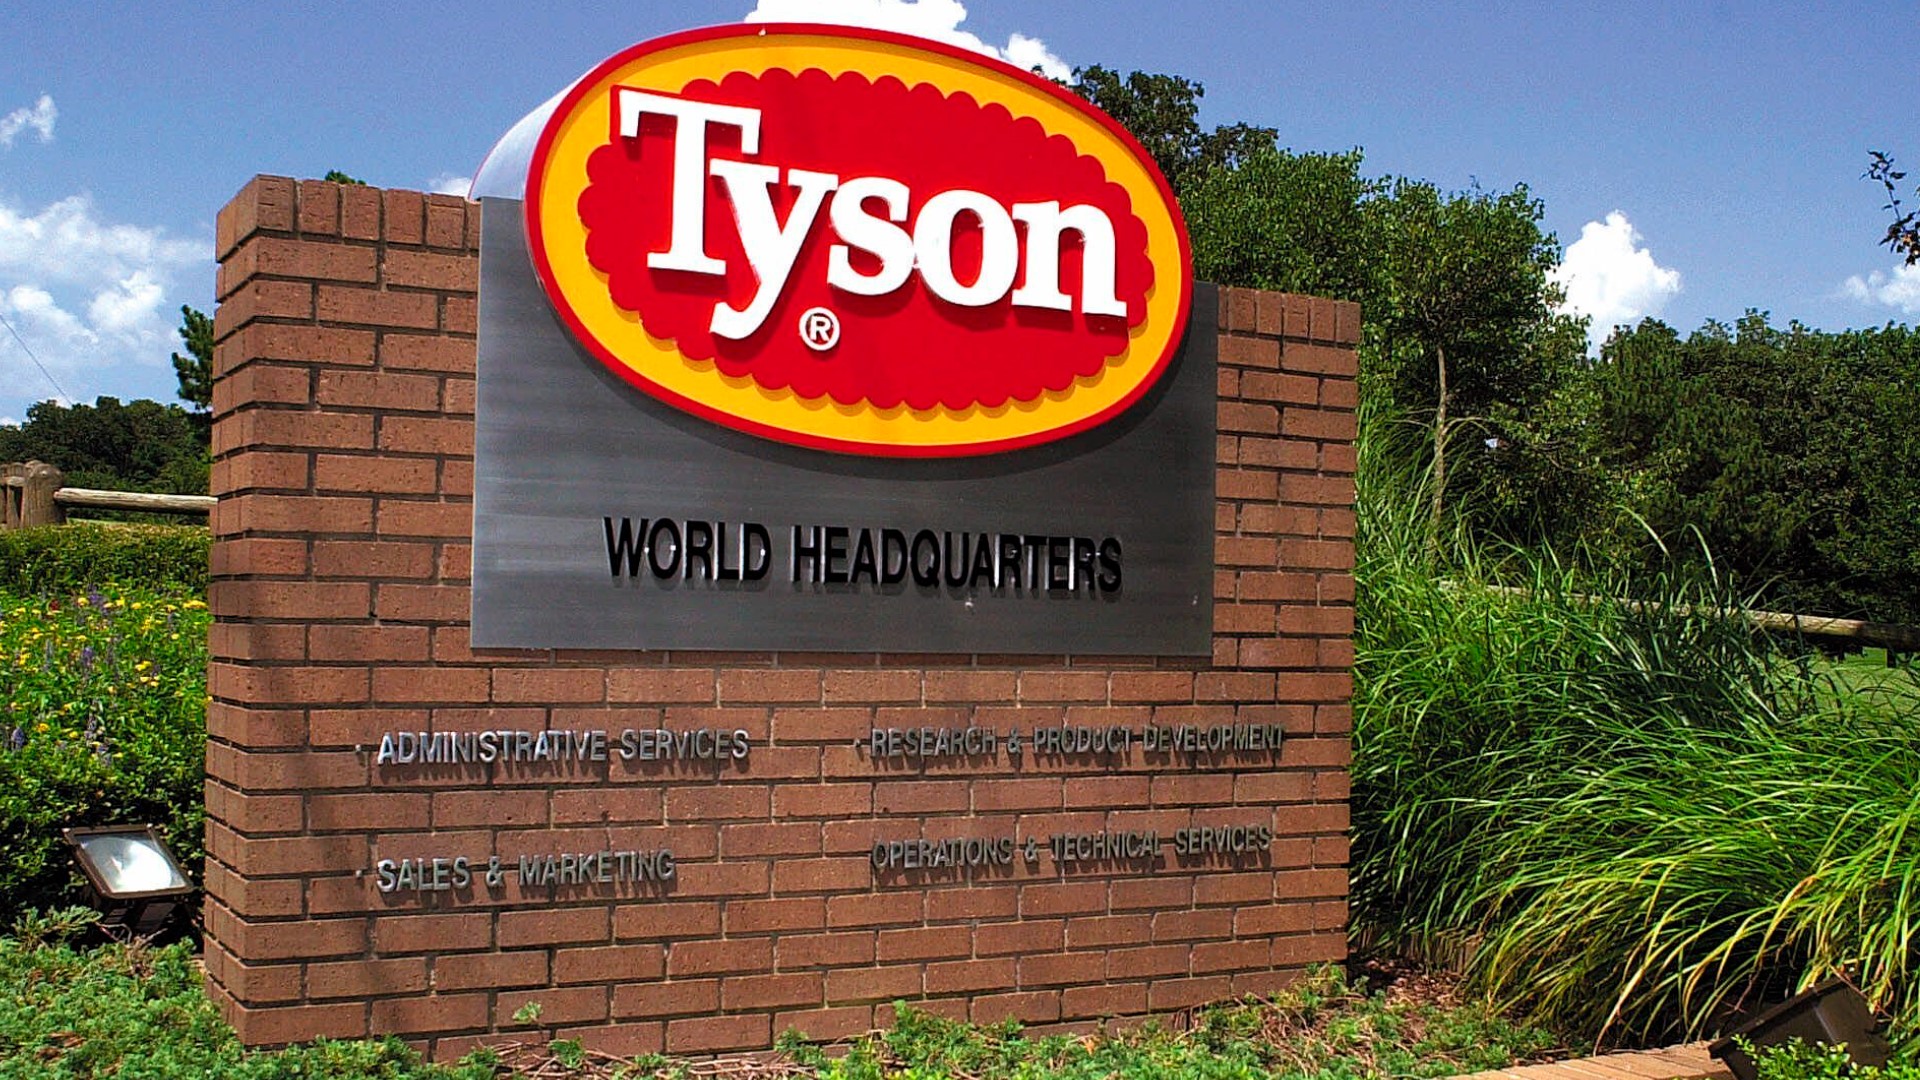 Springdale-based Tyson Foods will be relocating all of its corporate employees to its headquarters in Northwest Arkansas.